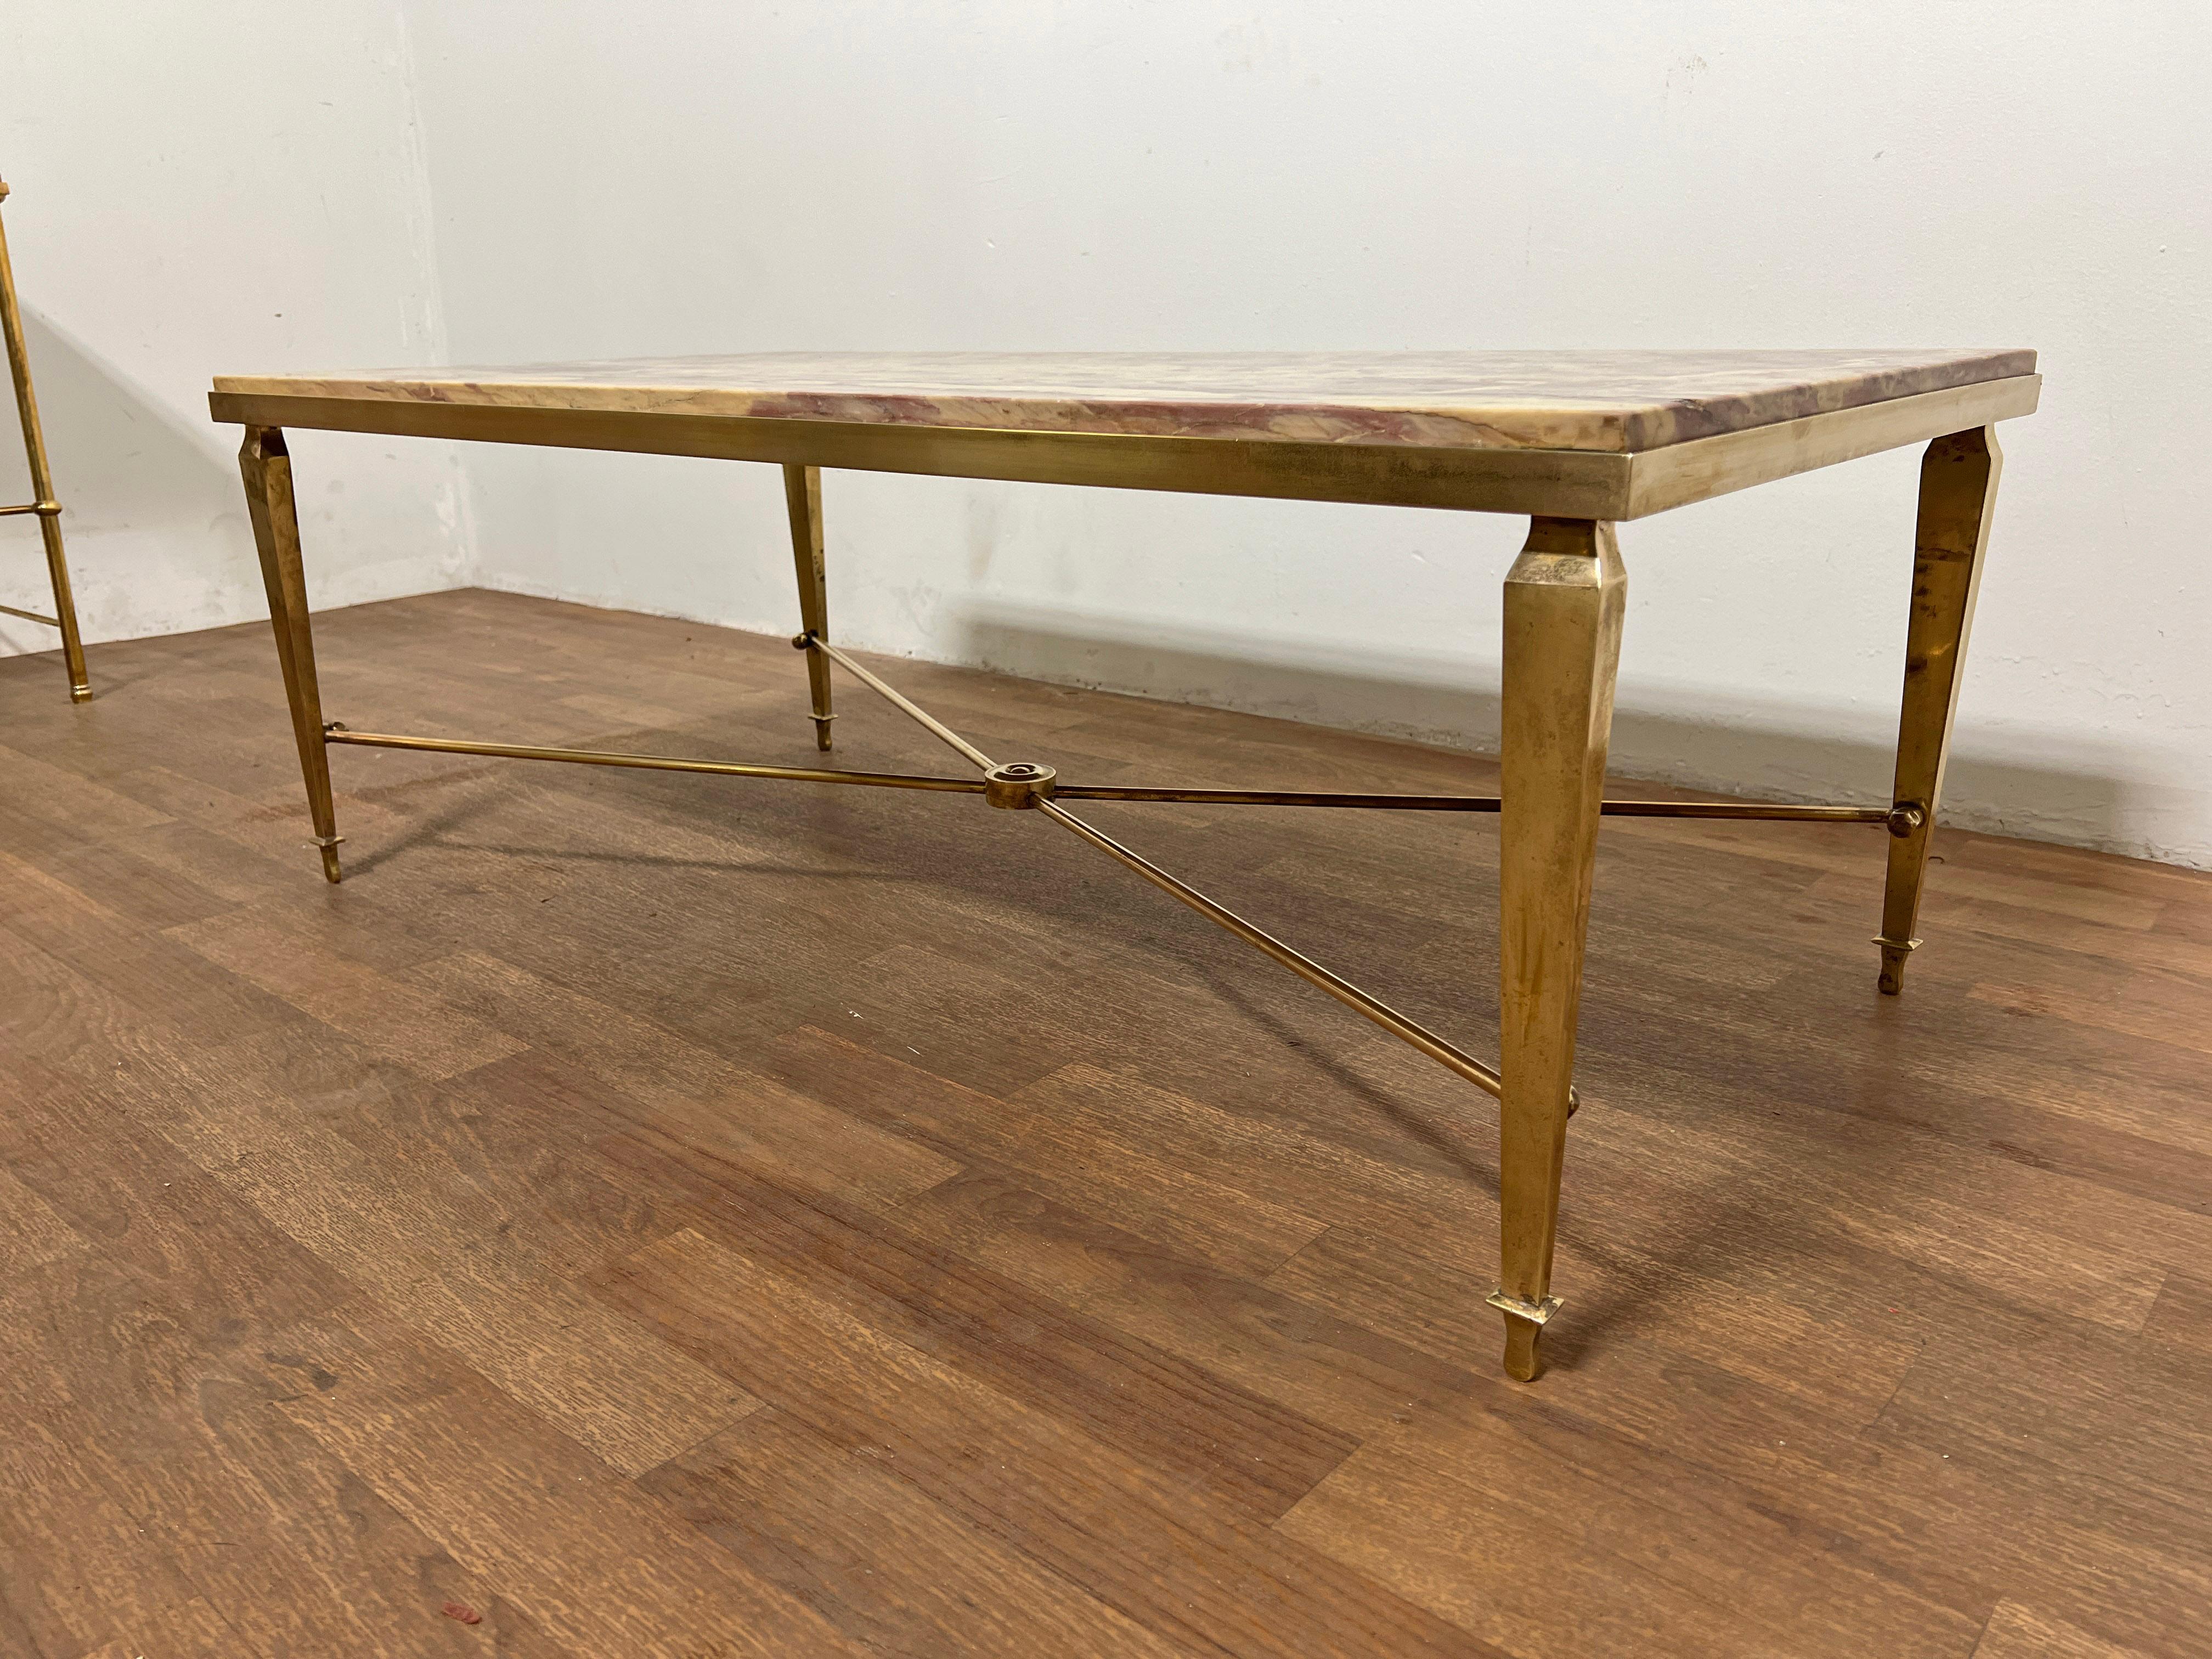 Mid-20th Century Maison Jansen Solid Brass Coffee Table With Lavender Marble Top, C. 1950s For Sale